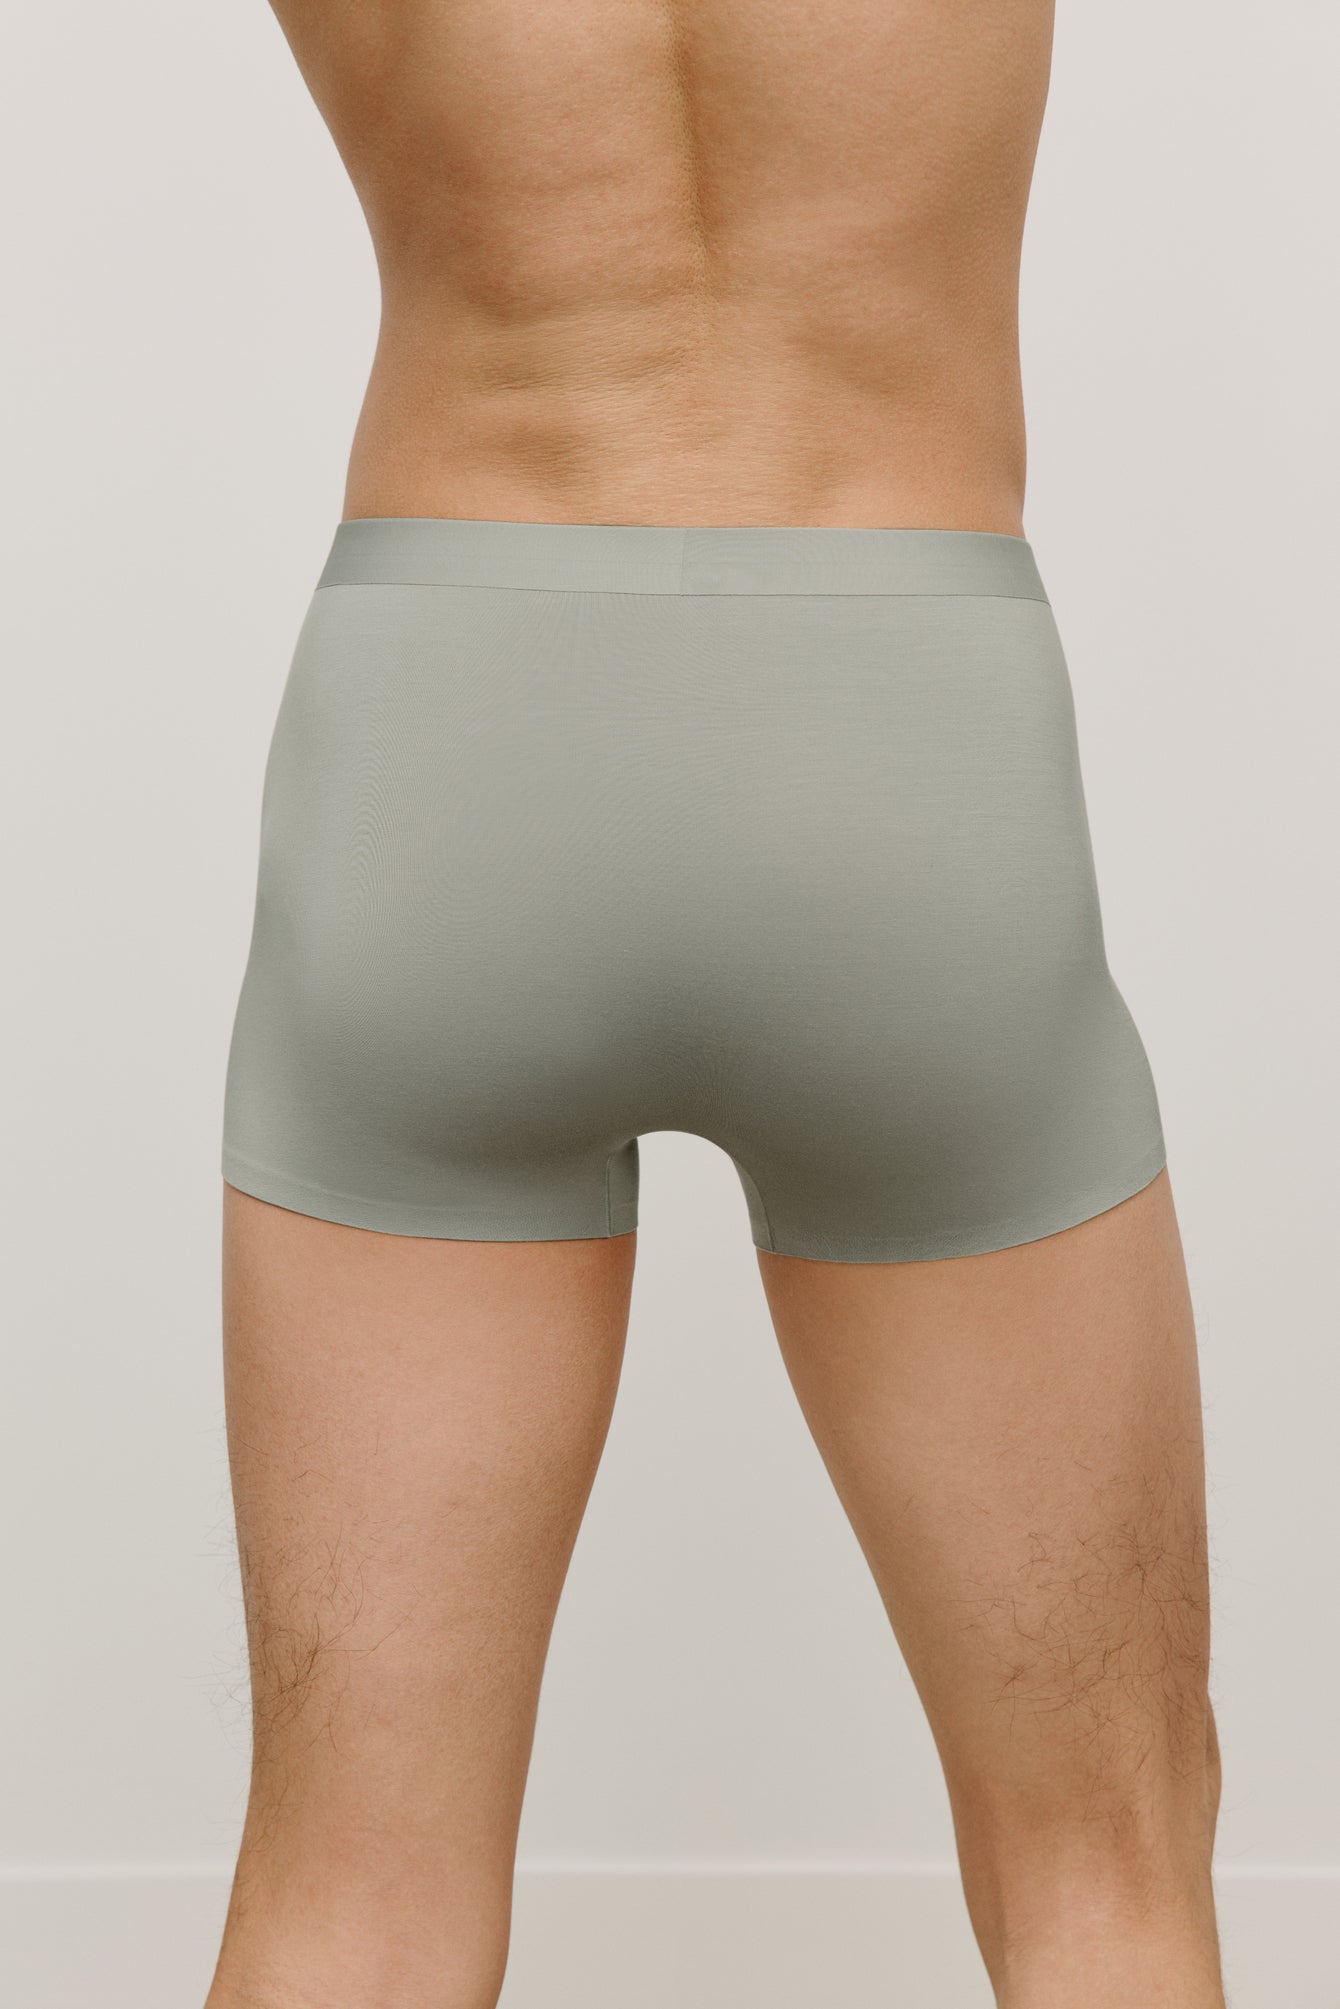 back of a man wearing a green brief